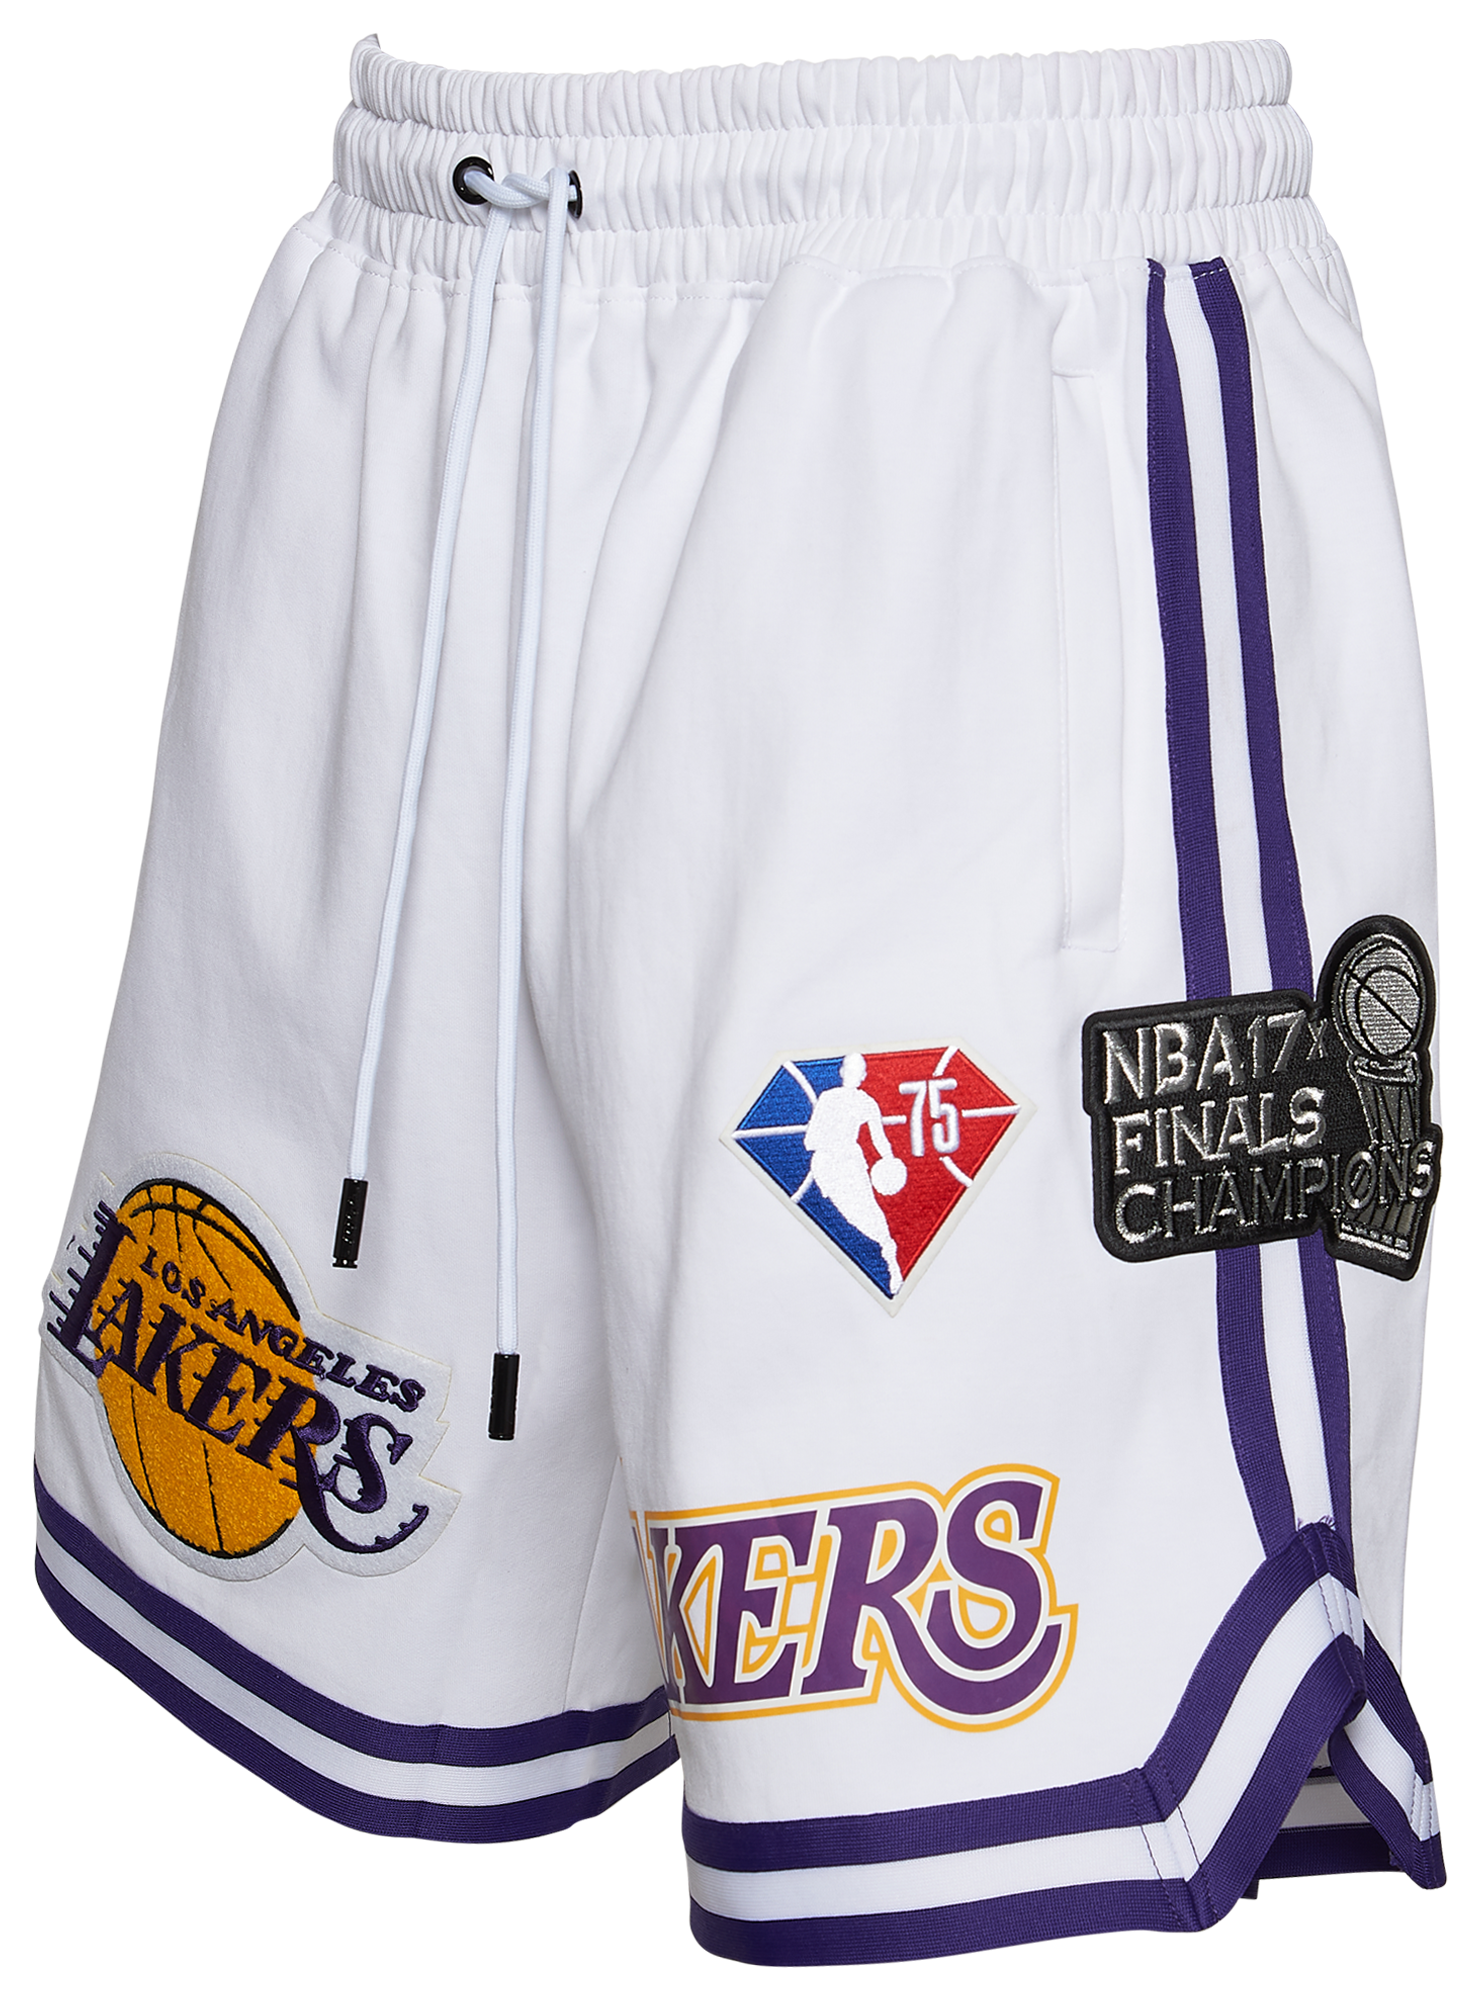 Pro Standard Los Angeles Lakers Shorts